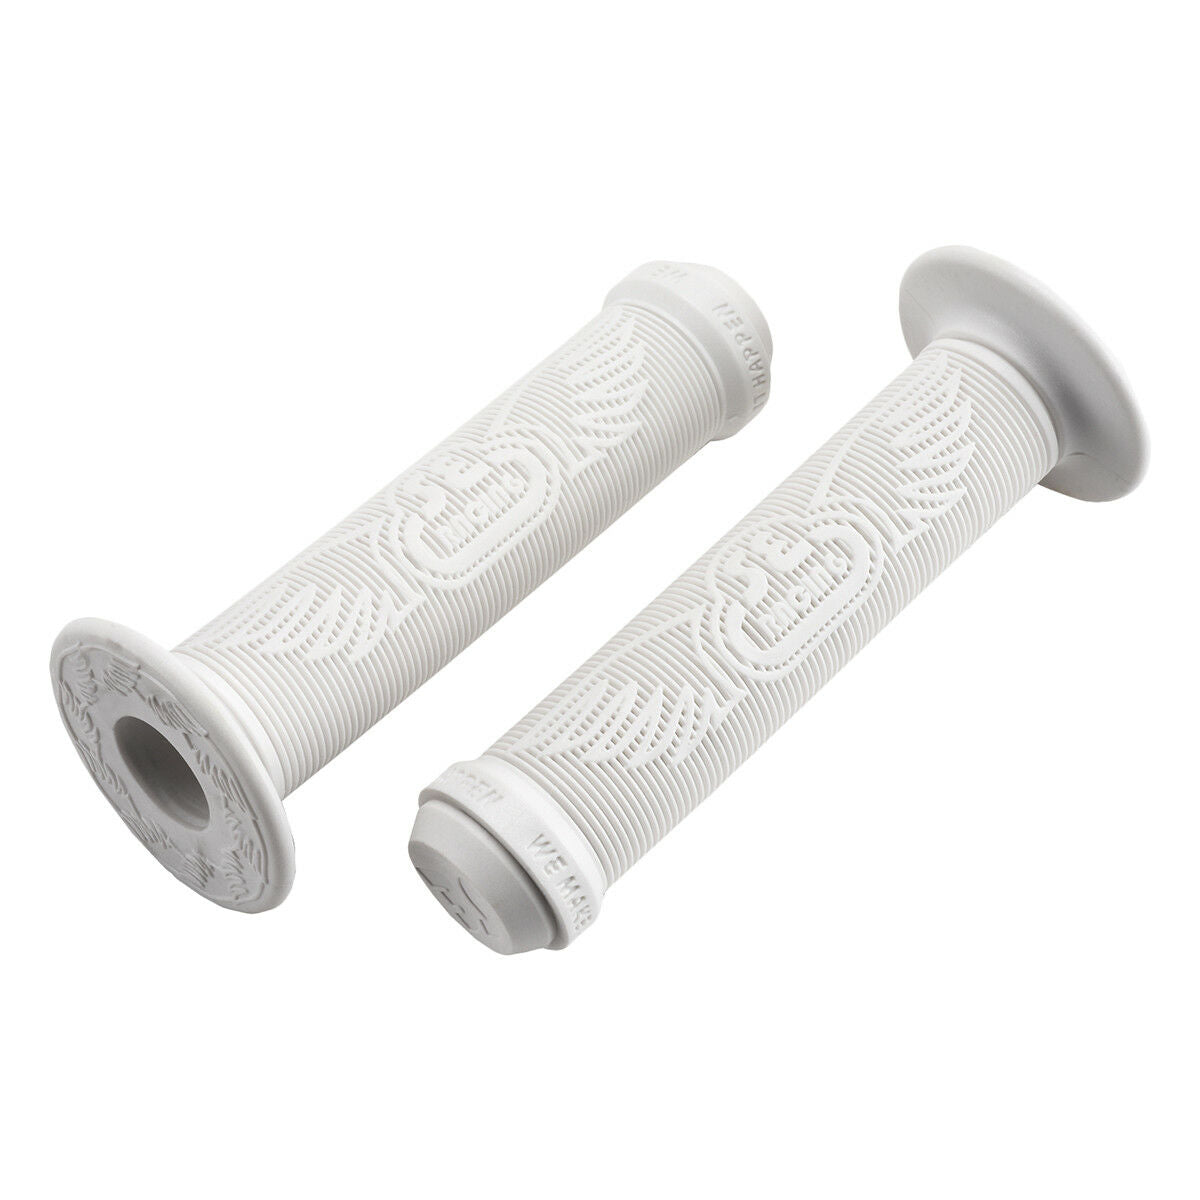 SE Racing Wing BMX Grips - Flanged - White